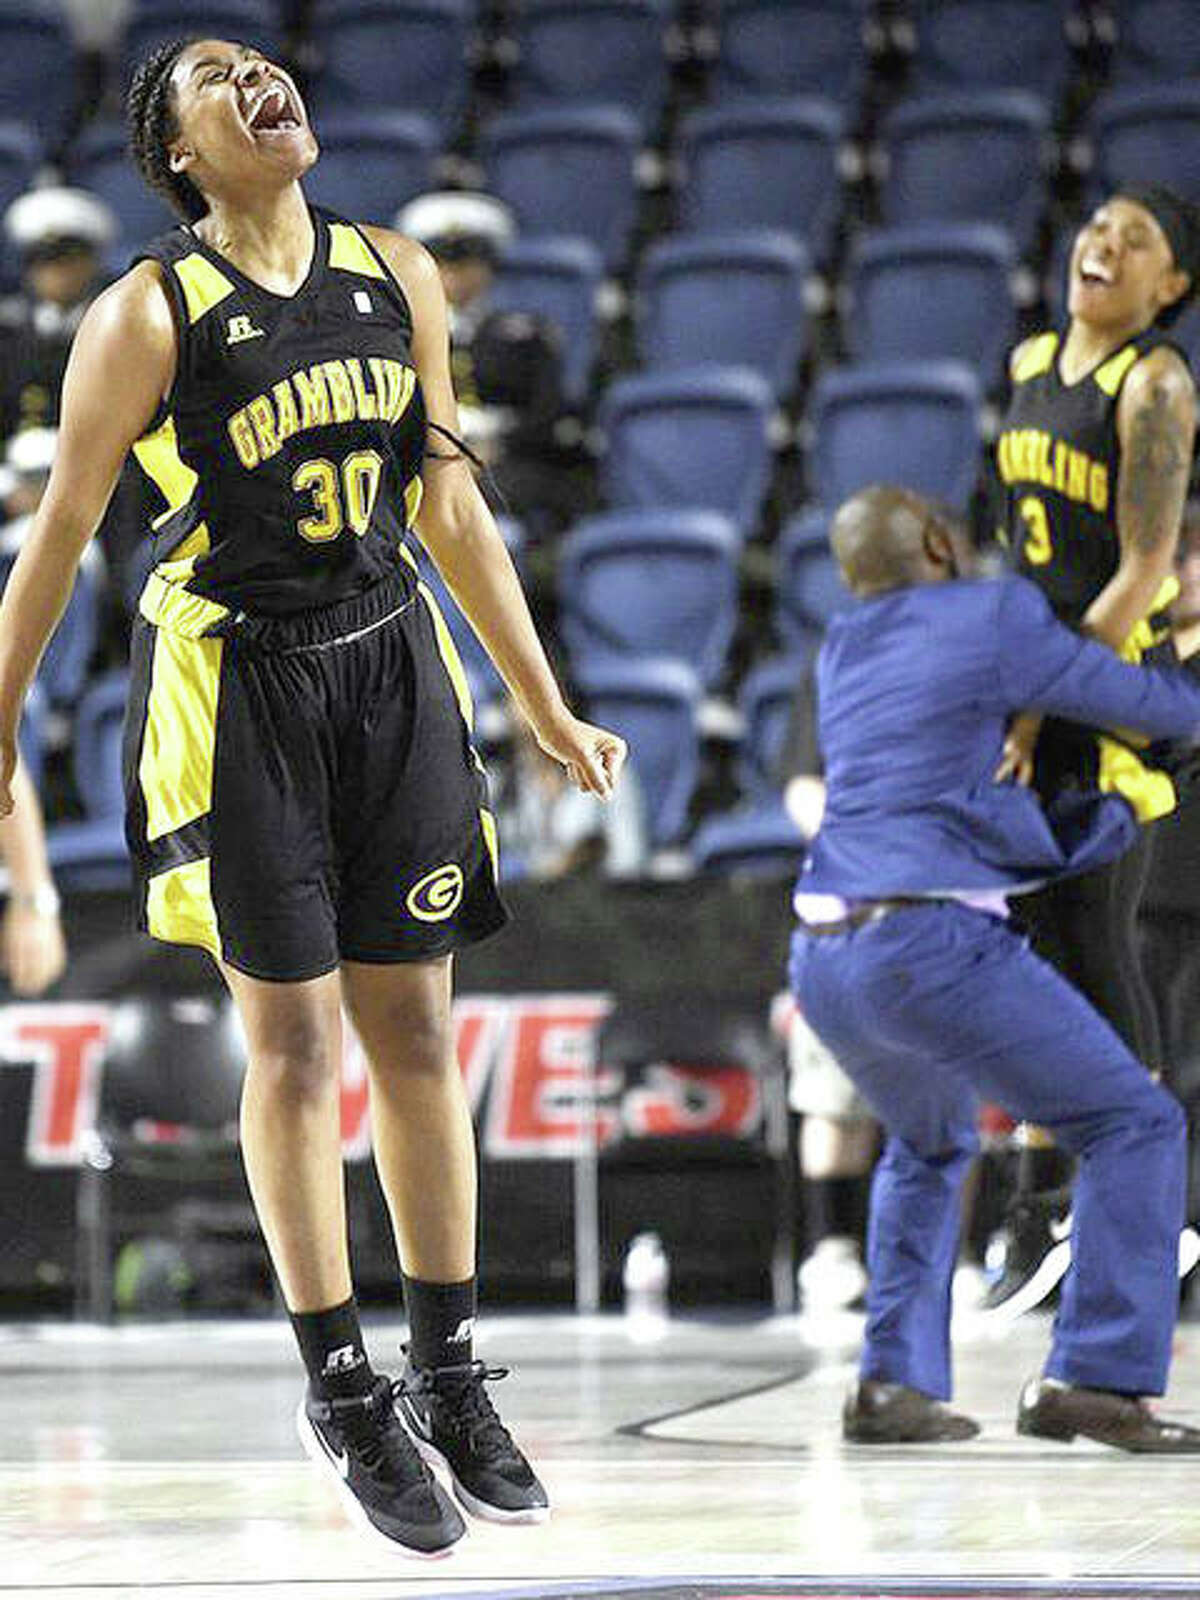 Grambling State forward Alexus Williams (30) celebrates the team’s 72-68 win over Southern, in the championship of the Southwestern Athletic Conference last March in Houston.Williams, who averaged 13.1 points per game for Grambling, has transferred to Lewis and Clark Community College. She scored 23 points for LCCC in its season-opening win over Arkansas State-Midsouth.